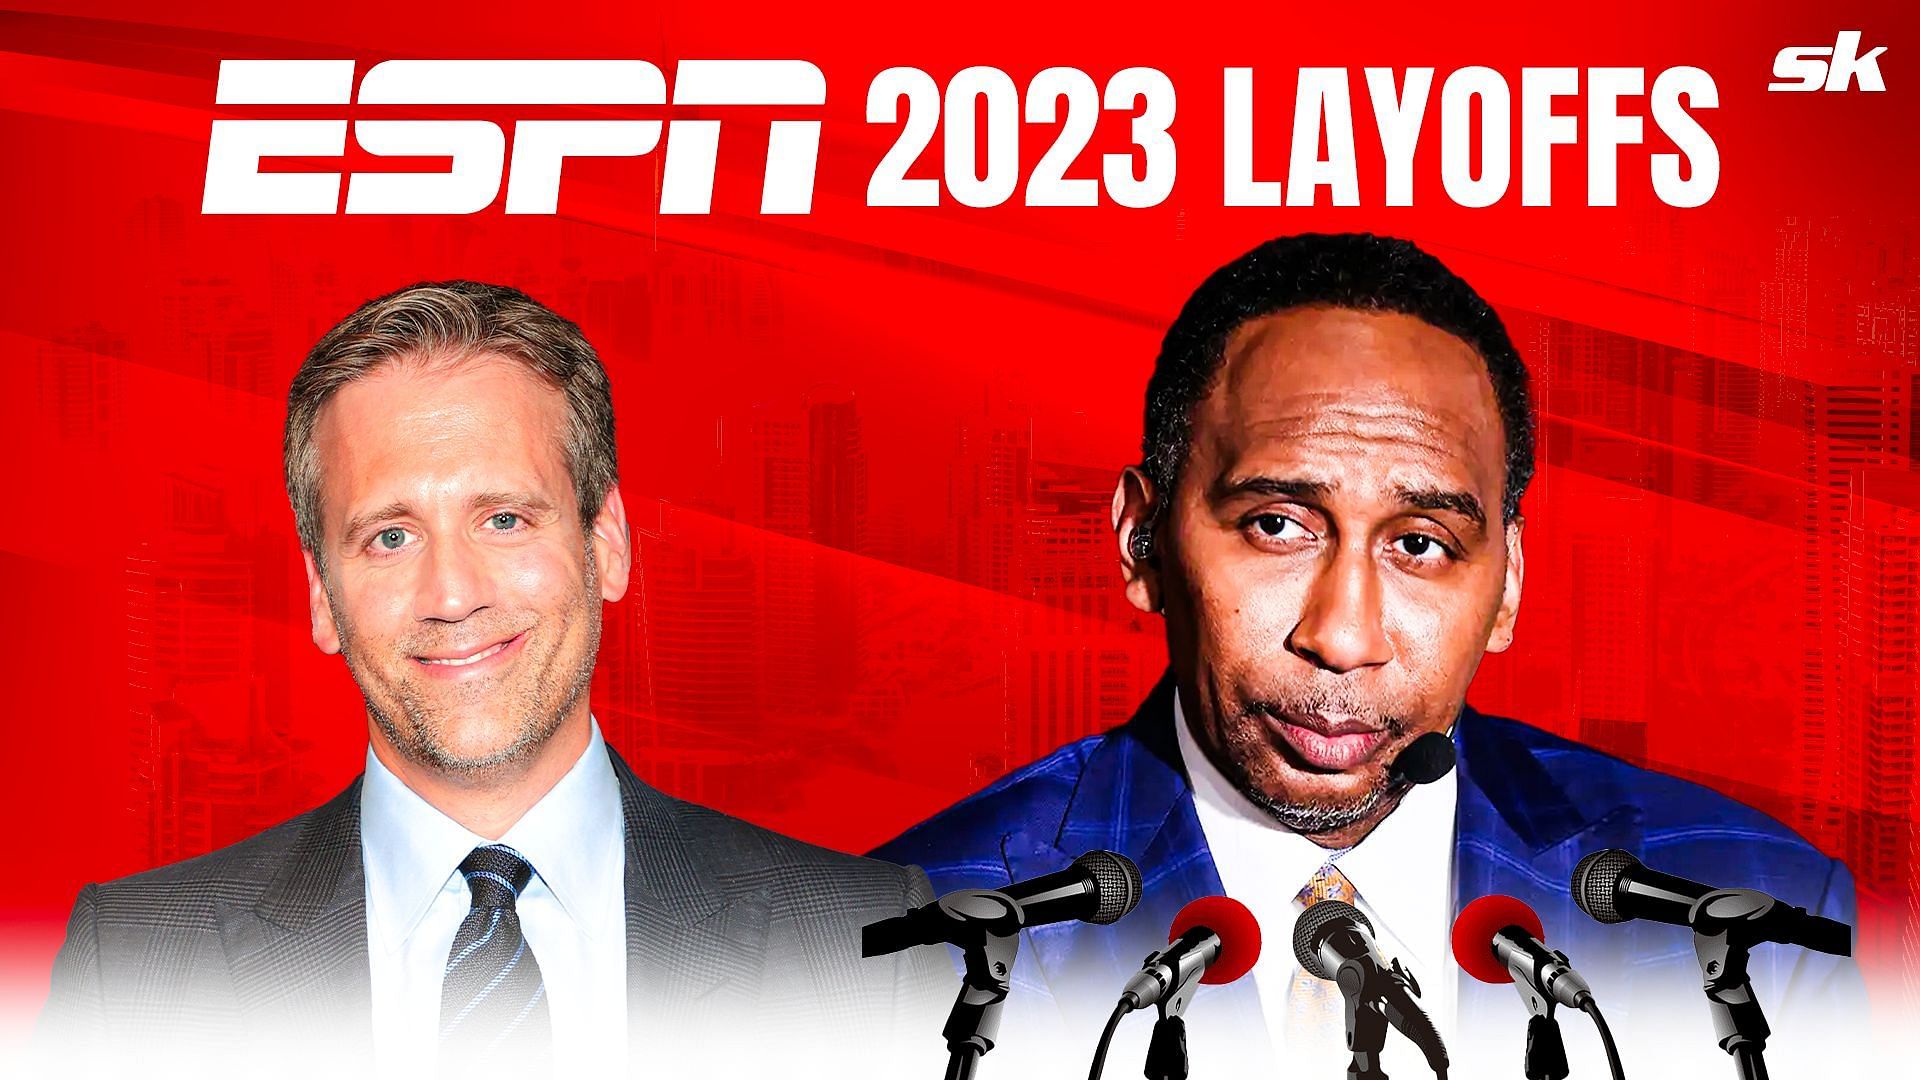 Stephen A. Smith is not happy with some accusations made at him